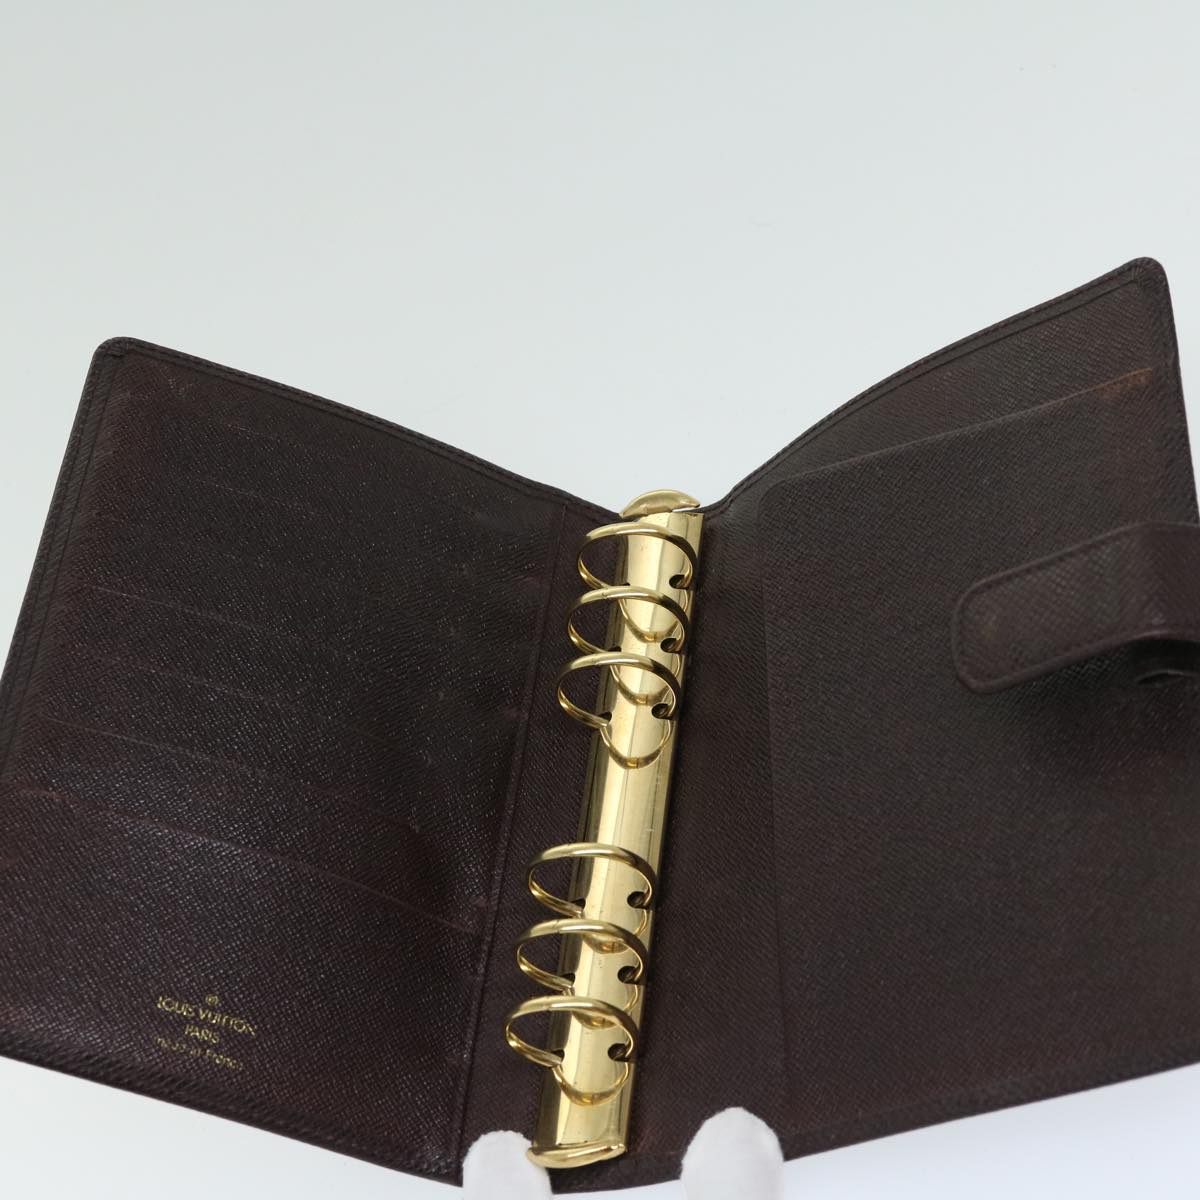 LOUIS VUITTON Taiga Leather Agenda MM Day Planner Cover Acajou R20416 Auth 67162